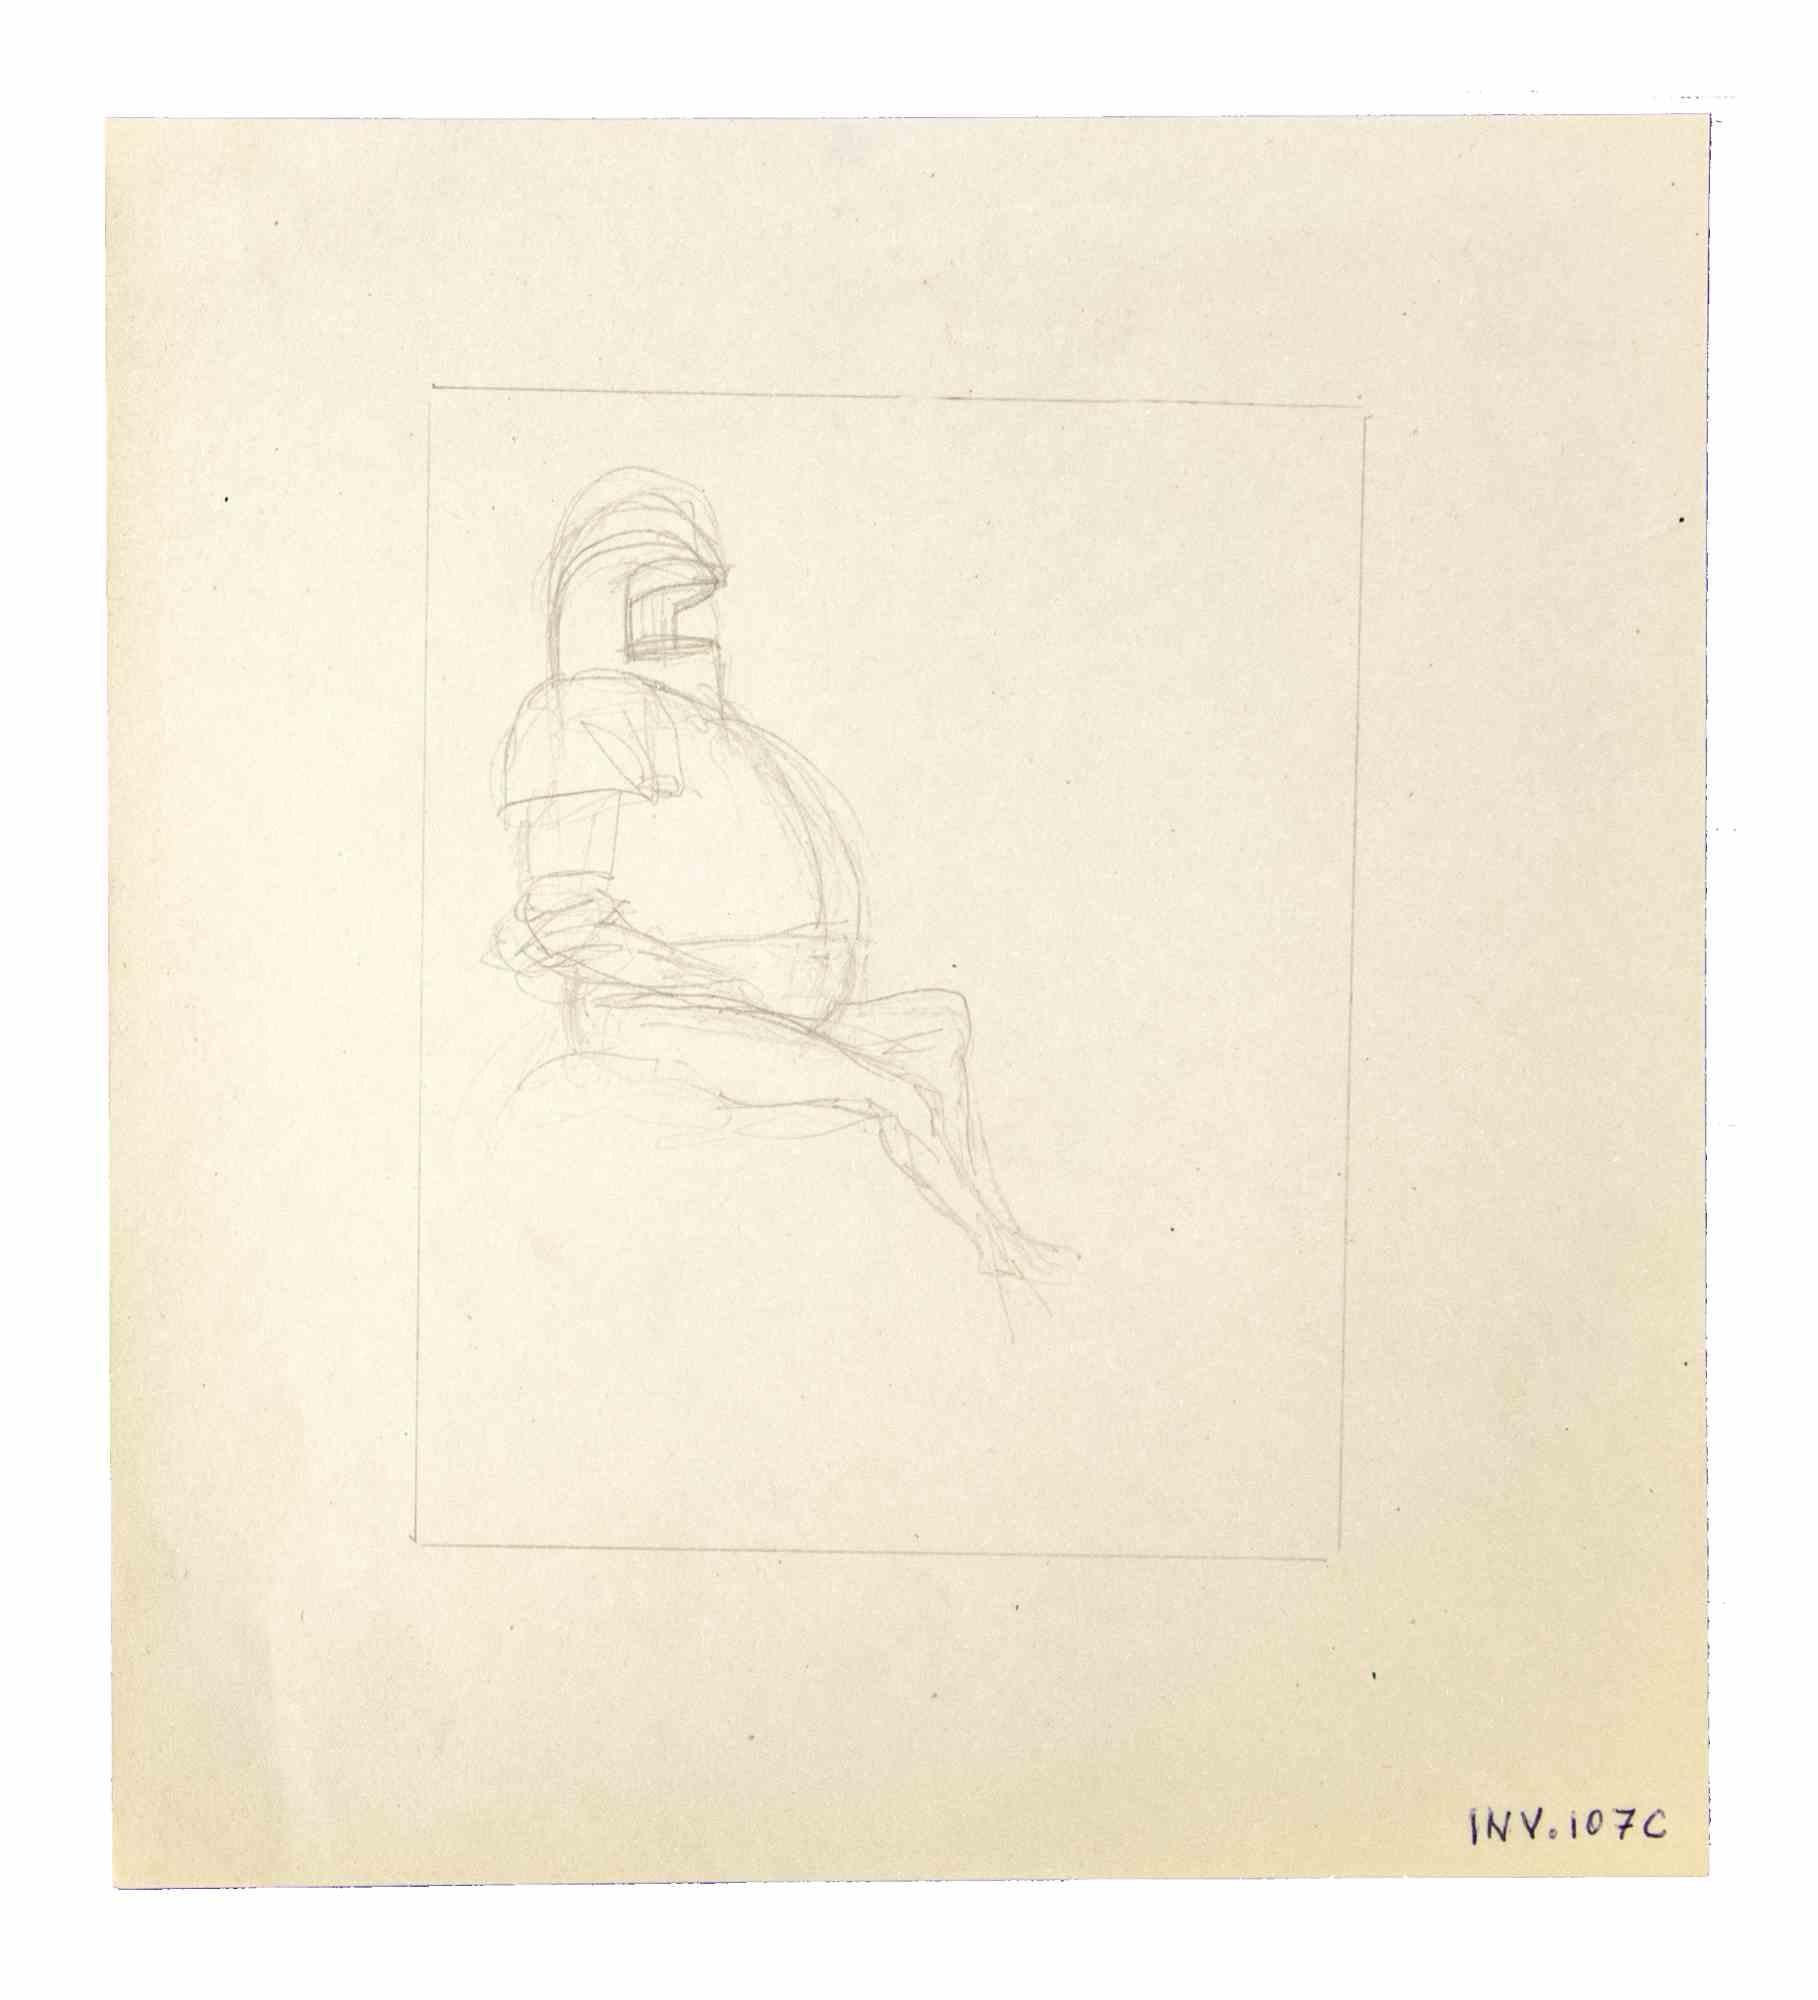 Knight is an original artwork realized in the 1970s by the Italian Contemporary artist  Leo Guida  (1992 - 2017).

Original drawings in pencil on paper.

Good conditions but aged.

The artwork is depicted through strong strokes in well-balanced